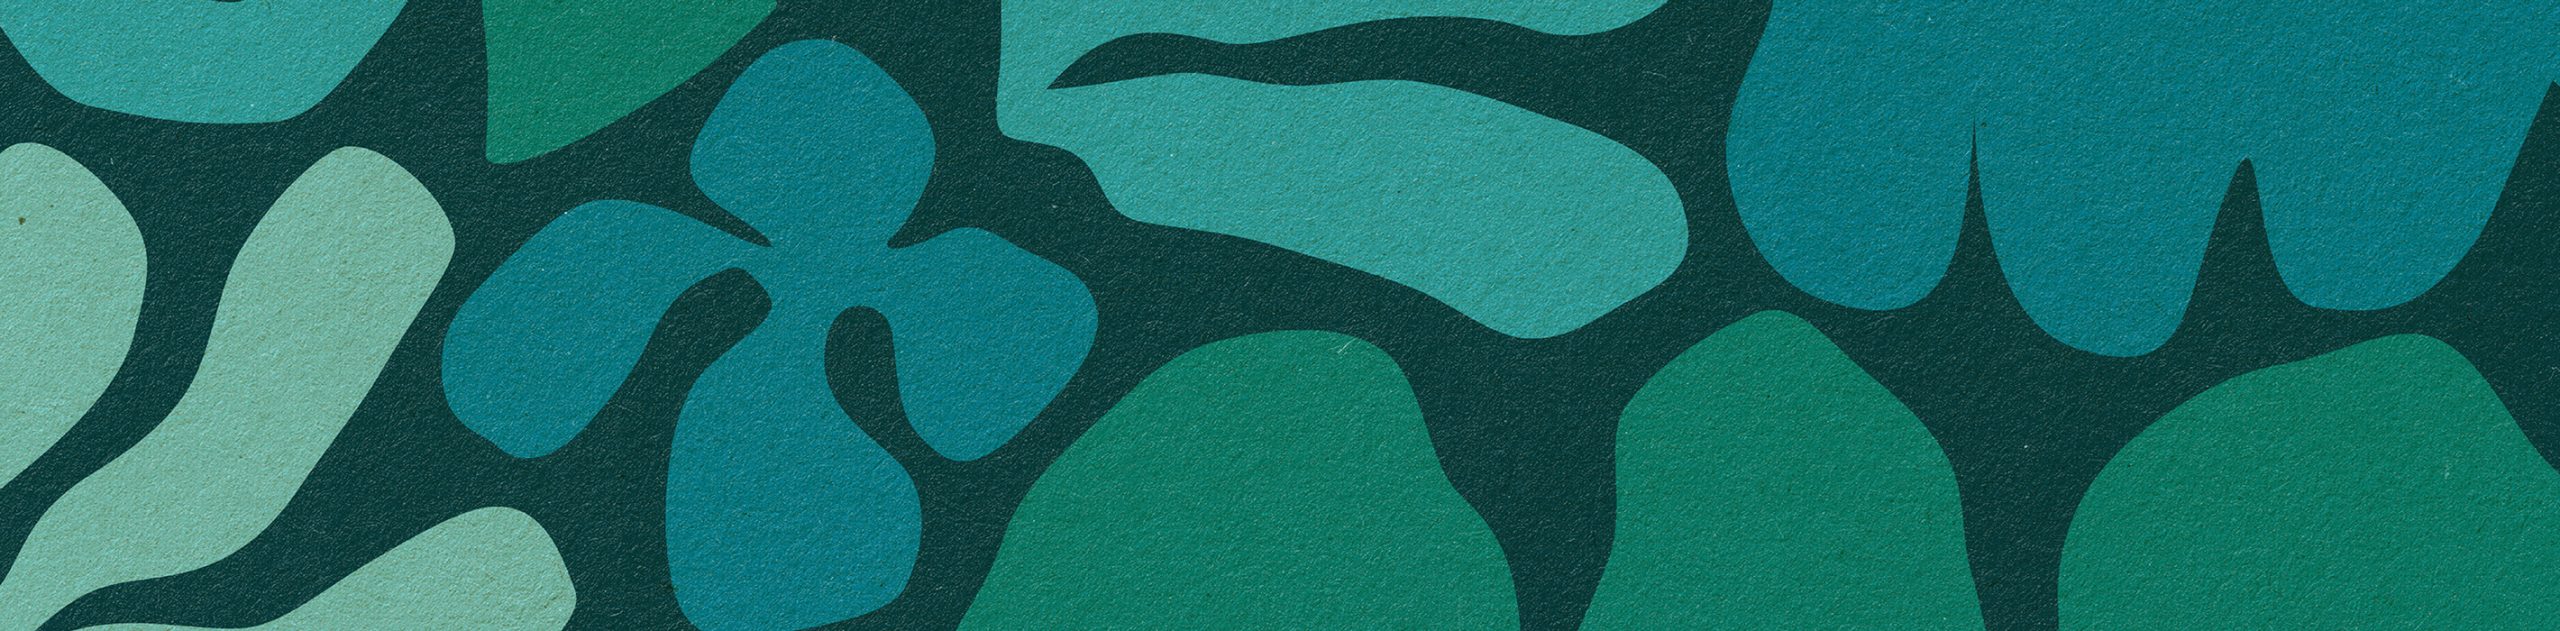 A cool green variation of The Boldest Co branded pattern, the blobby shapes being inspired by 1960s design.